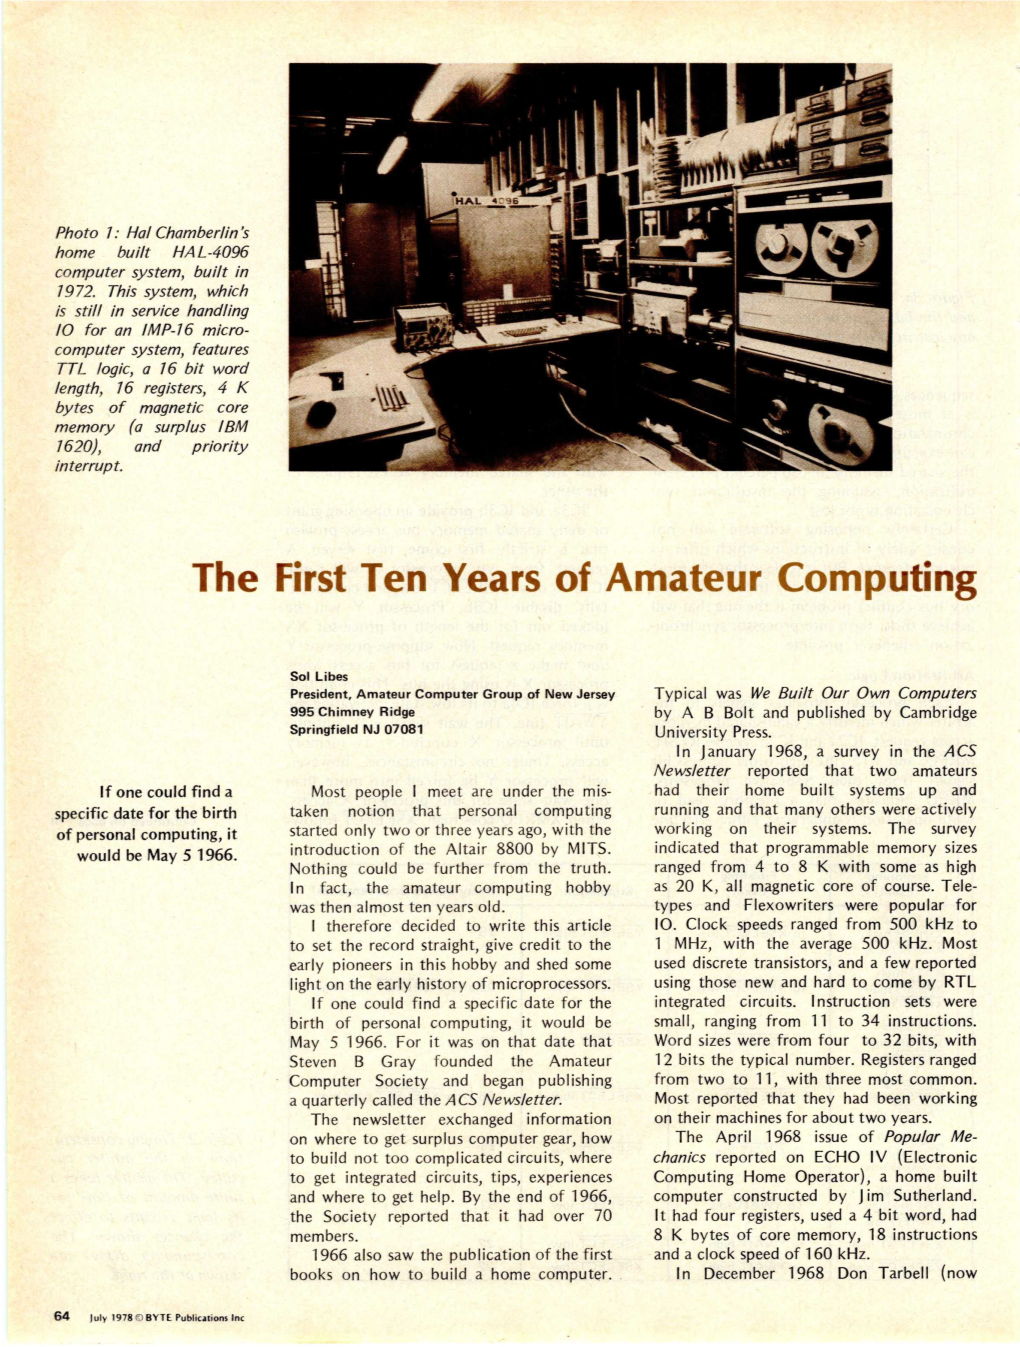 The First Ten Years of Amateur Computing, July 1978, BYTE